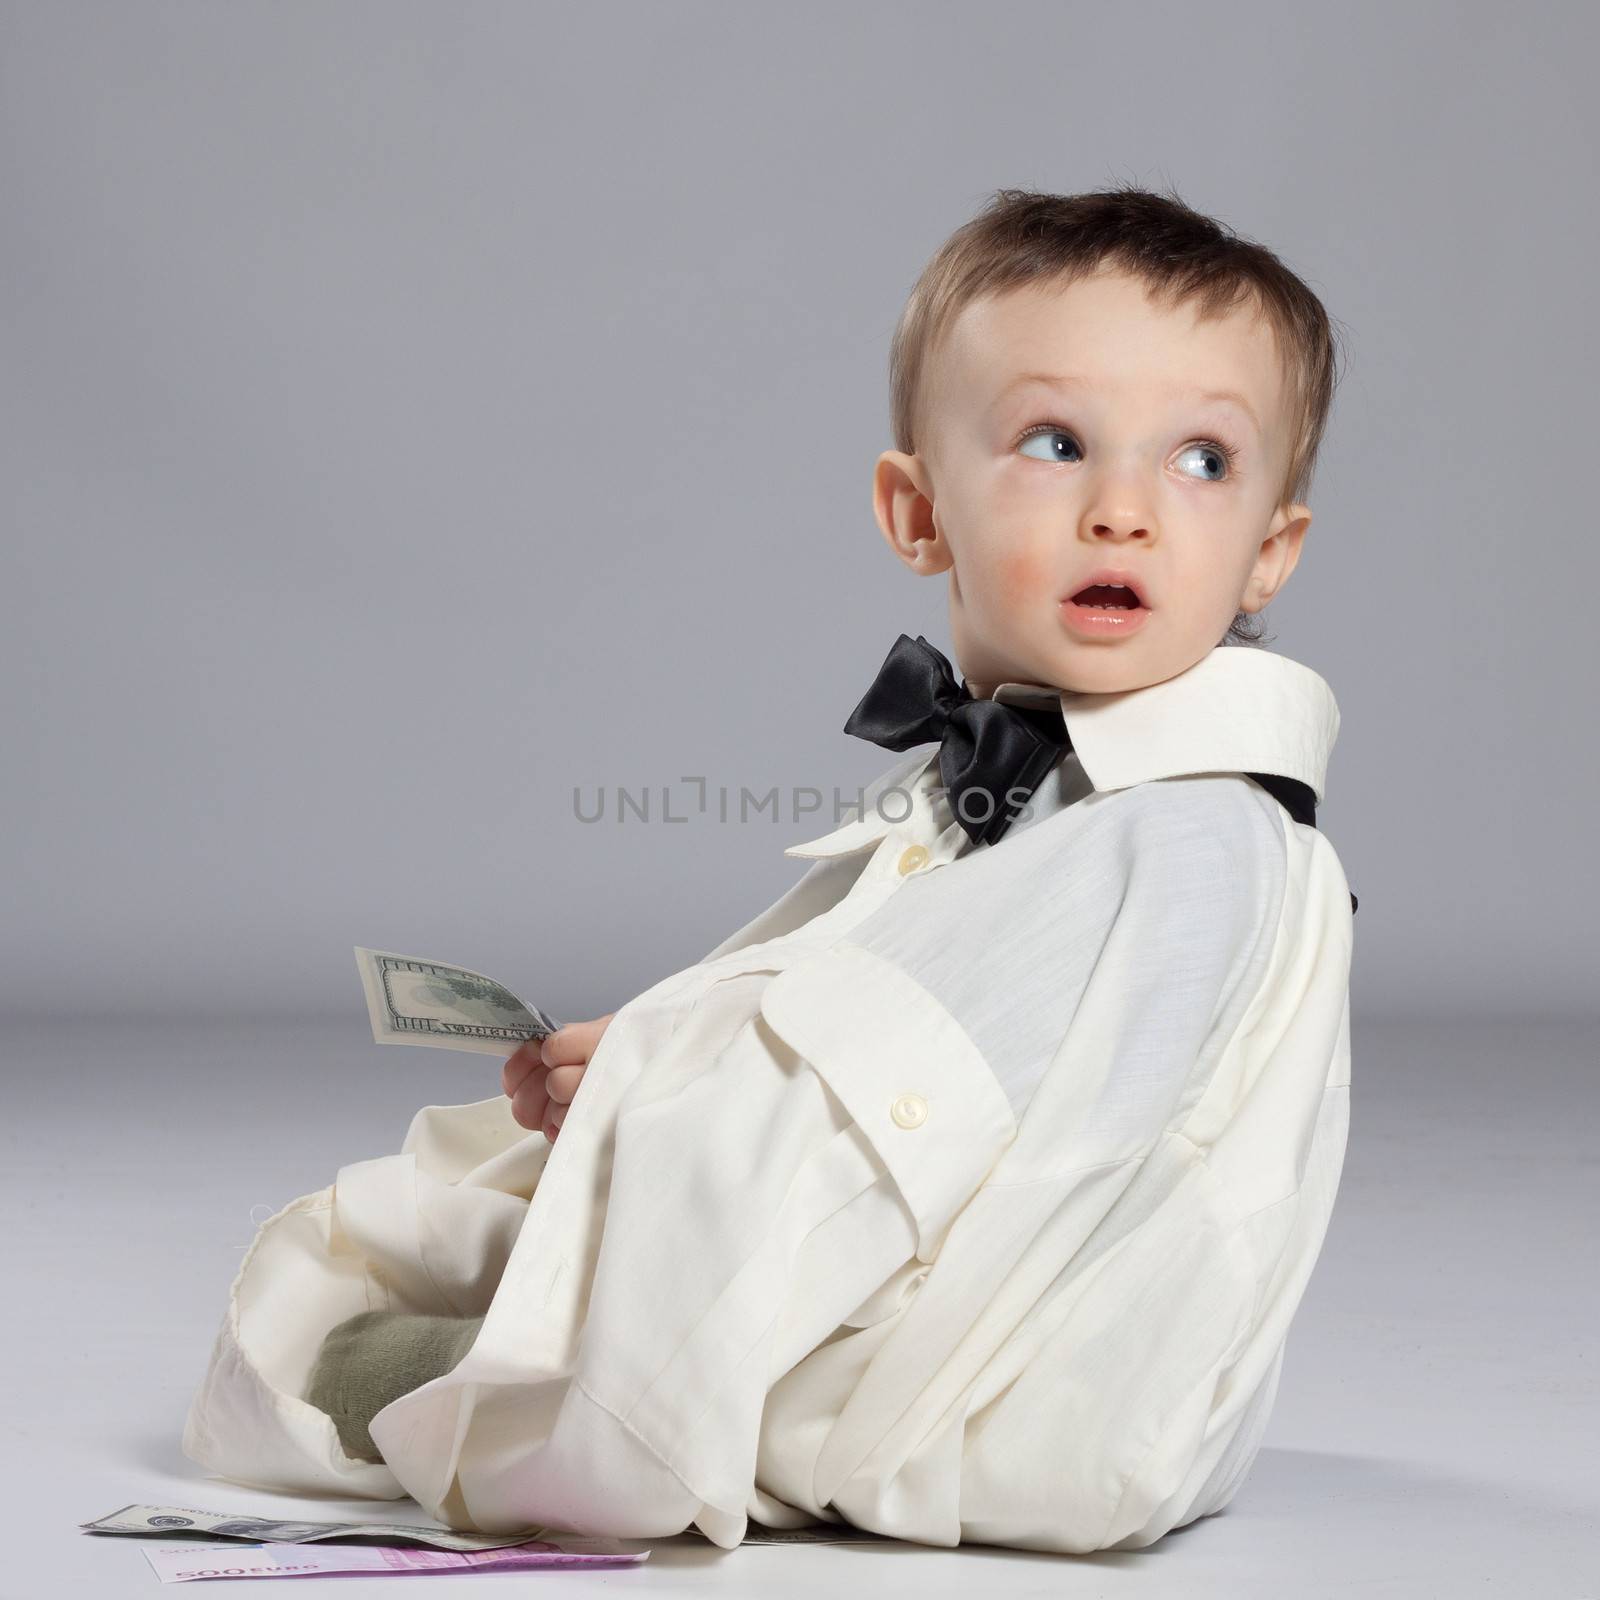 Boy toddler businessman, sitting next to a pile of money dressed in grown-shirt with bow tie, holding in hand the dollars